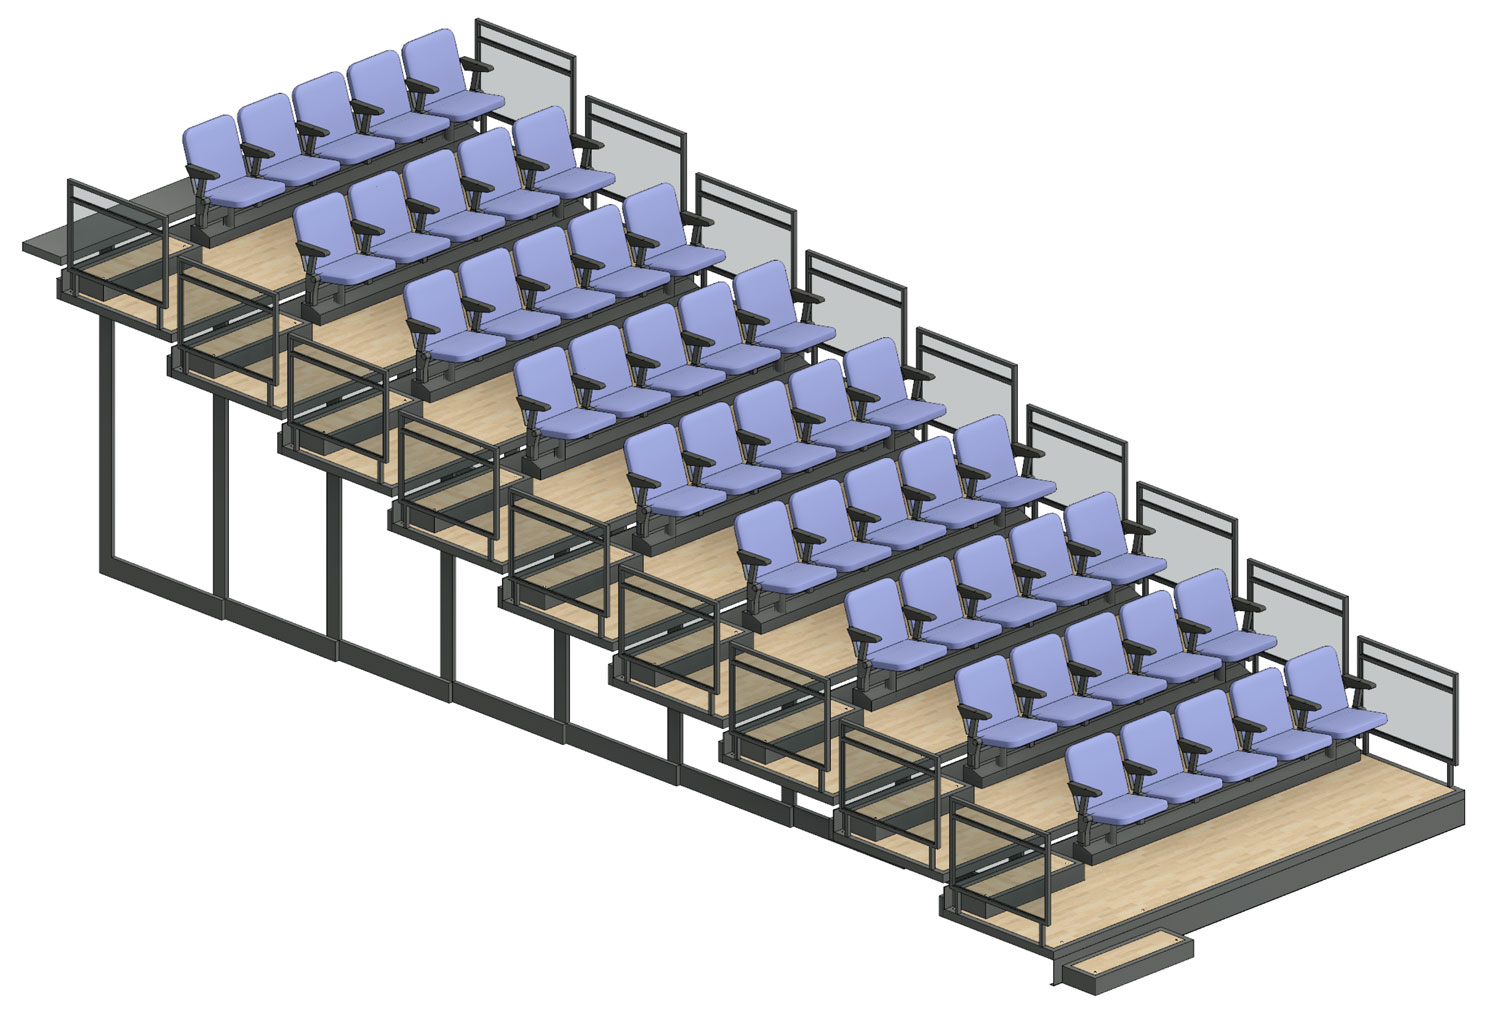 Retractable seating family in Revit with instance-based design options